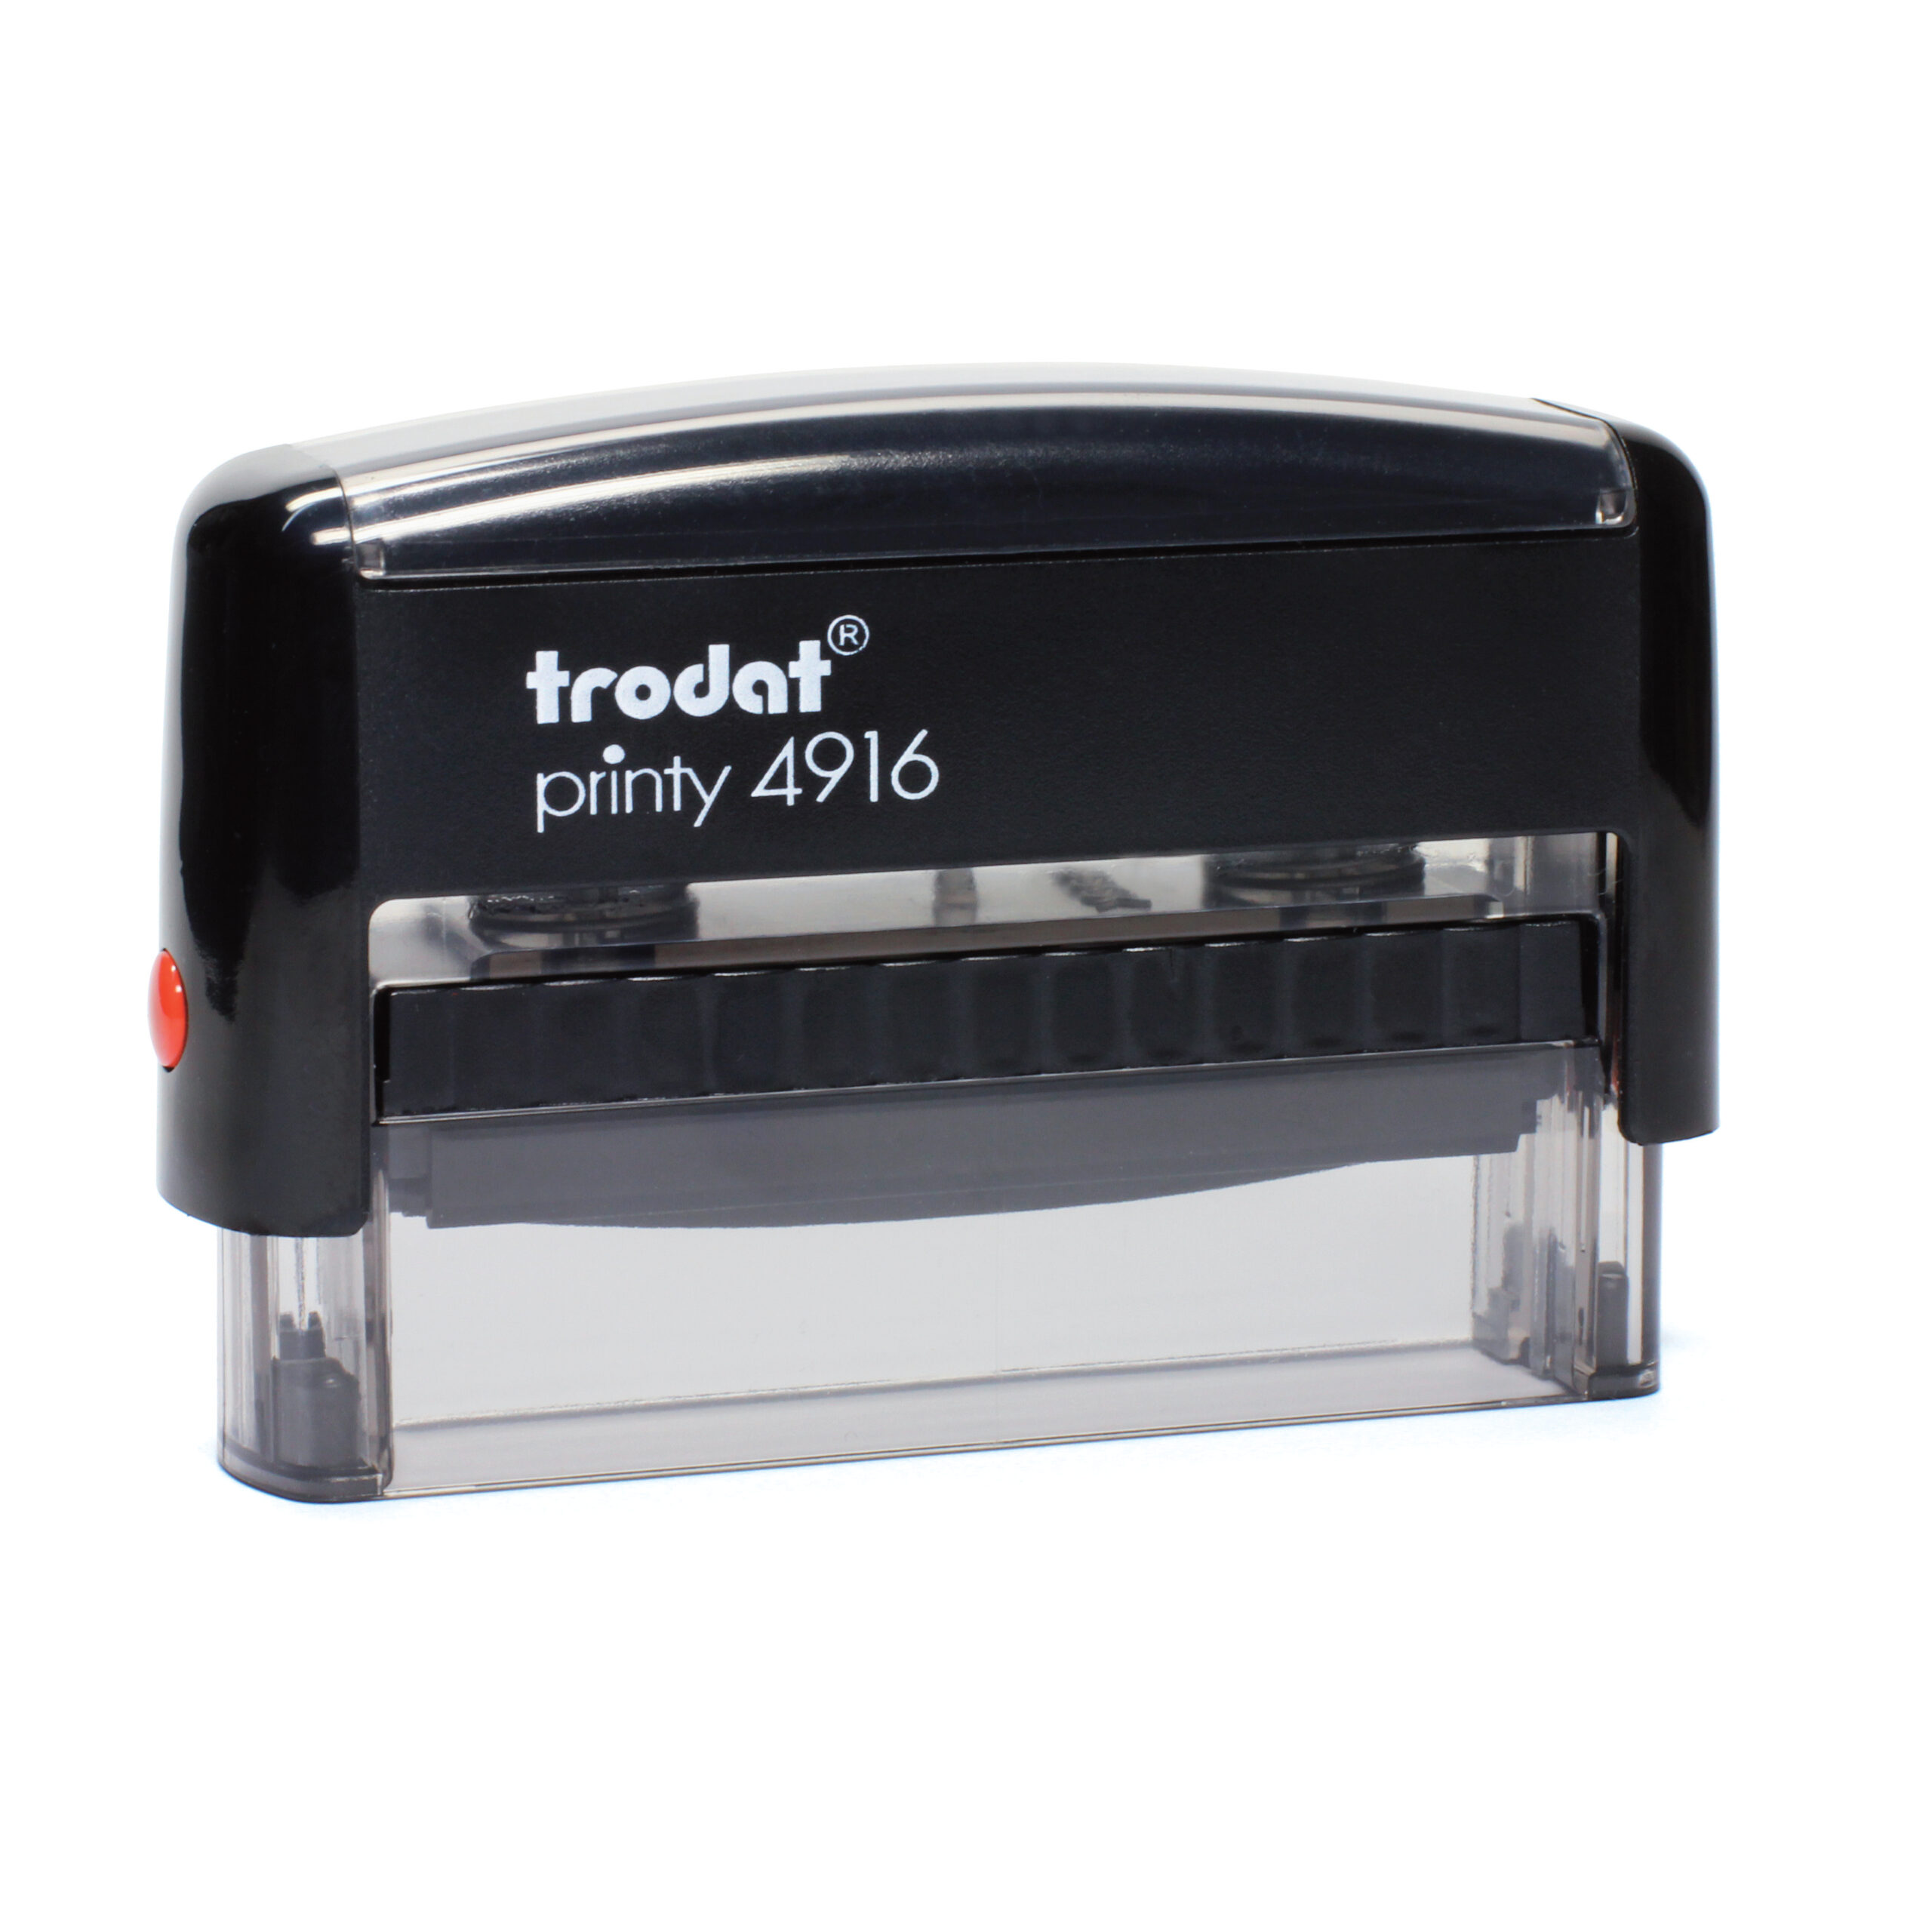 Create Your Own Stamp - Rubber Stamps Overnight